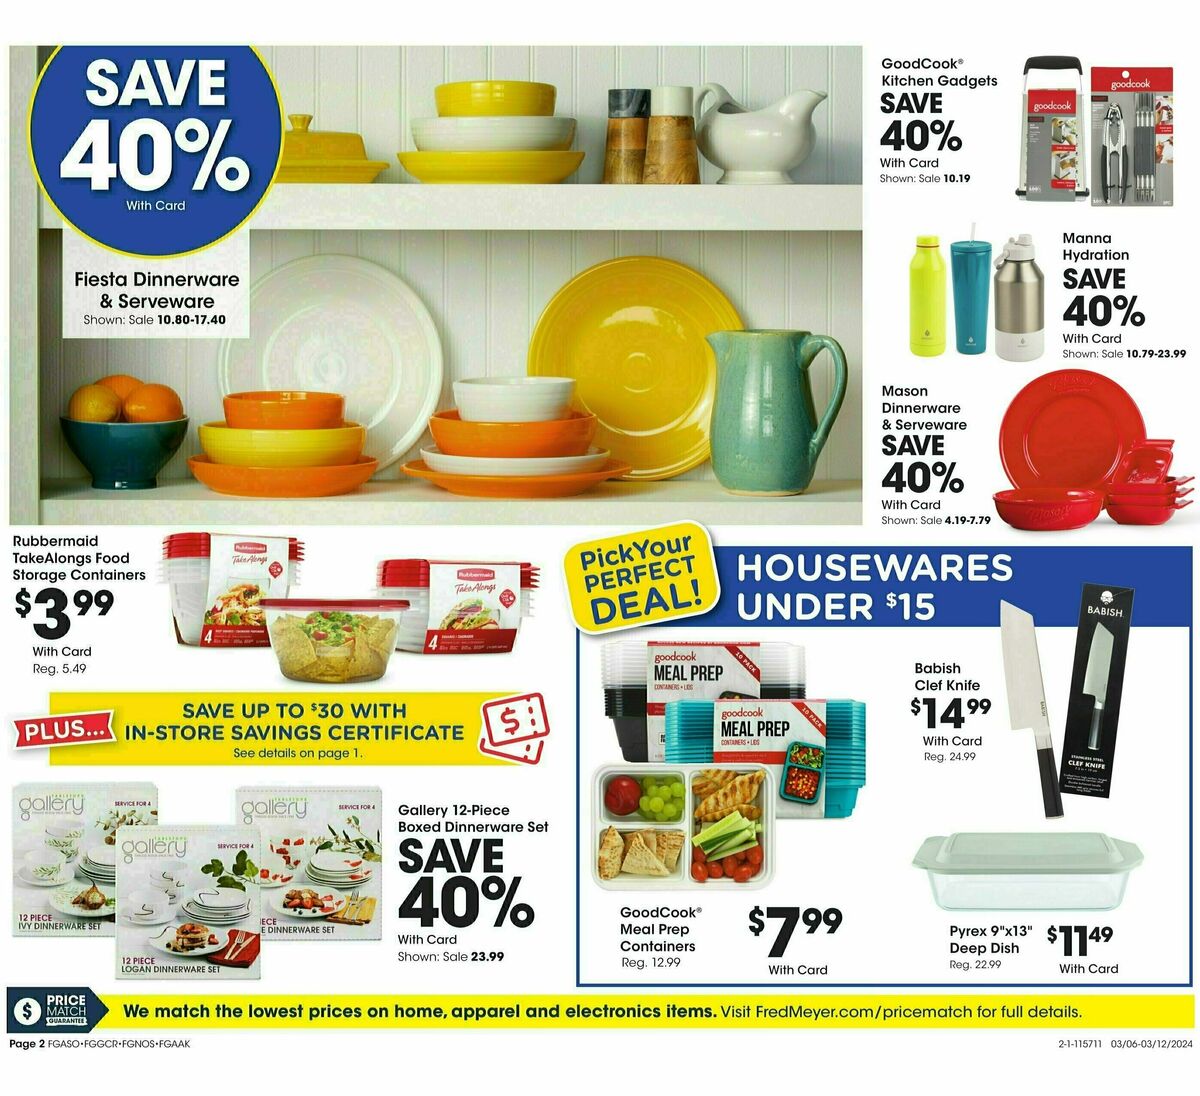 Fred Meyer Electronic Weekly Ad from March 6